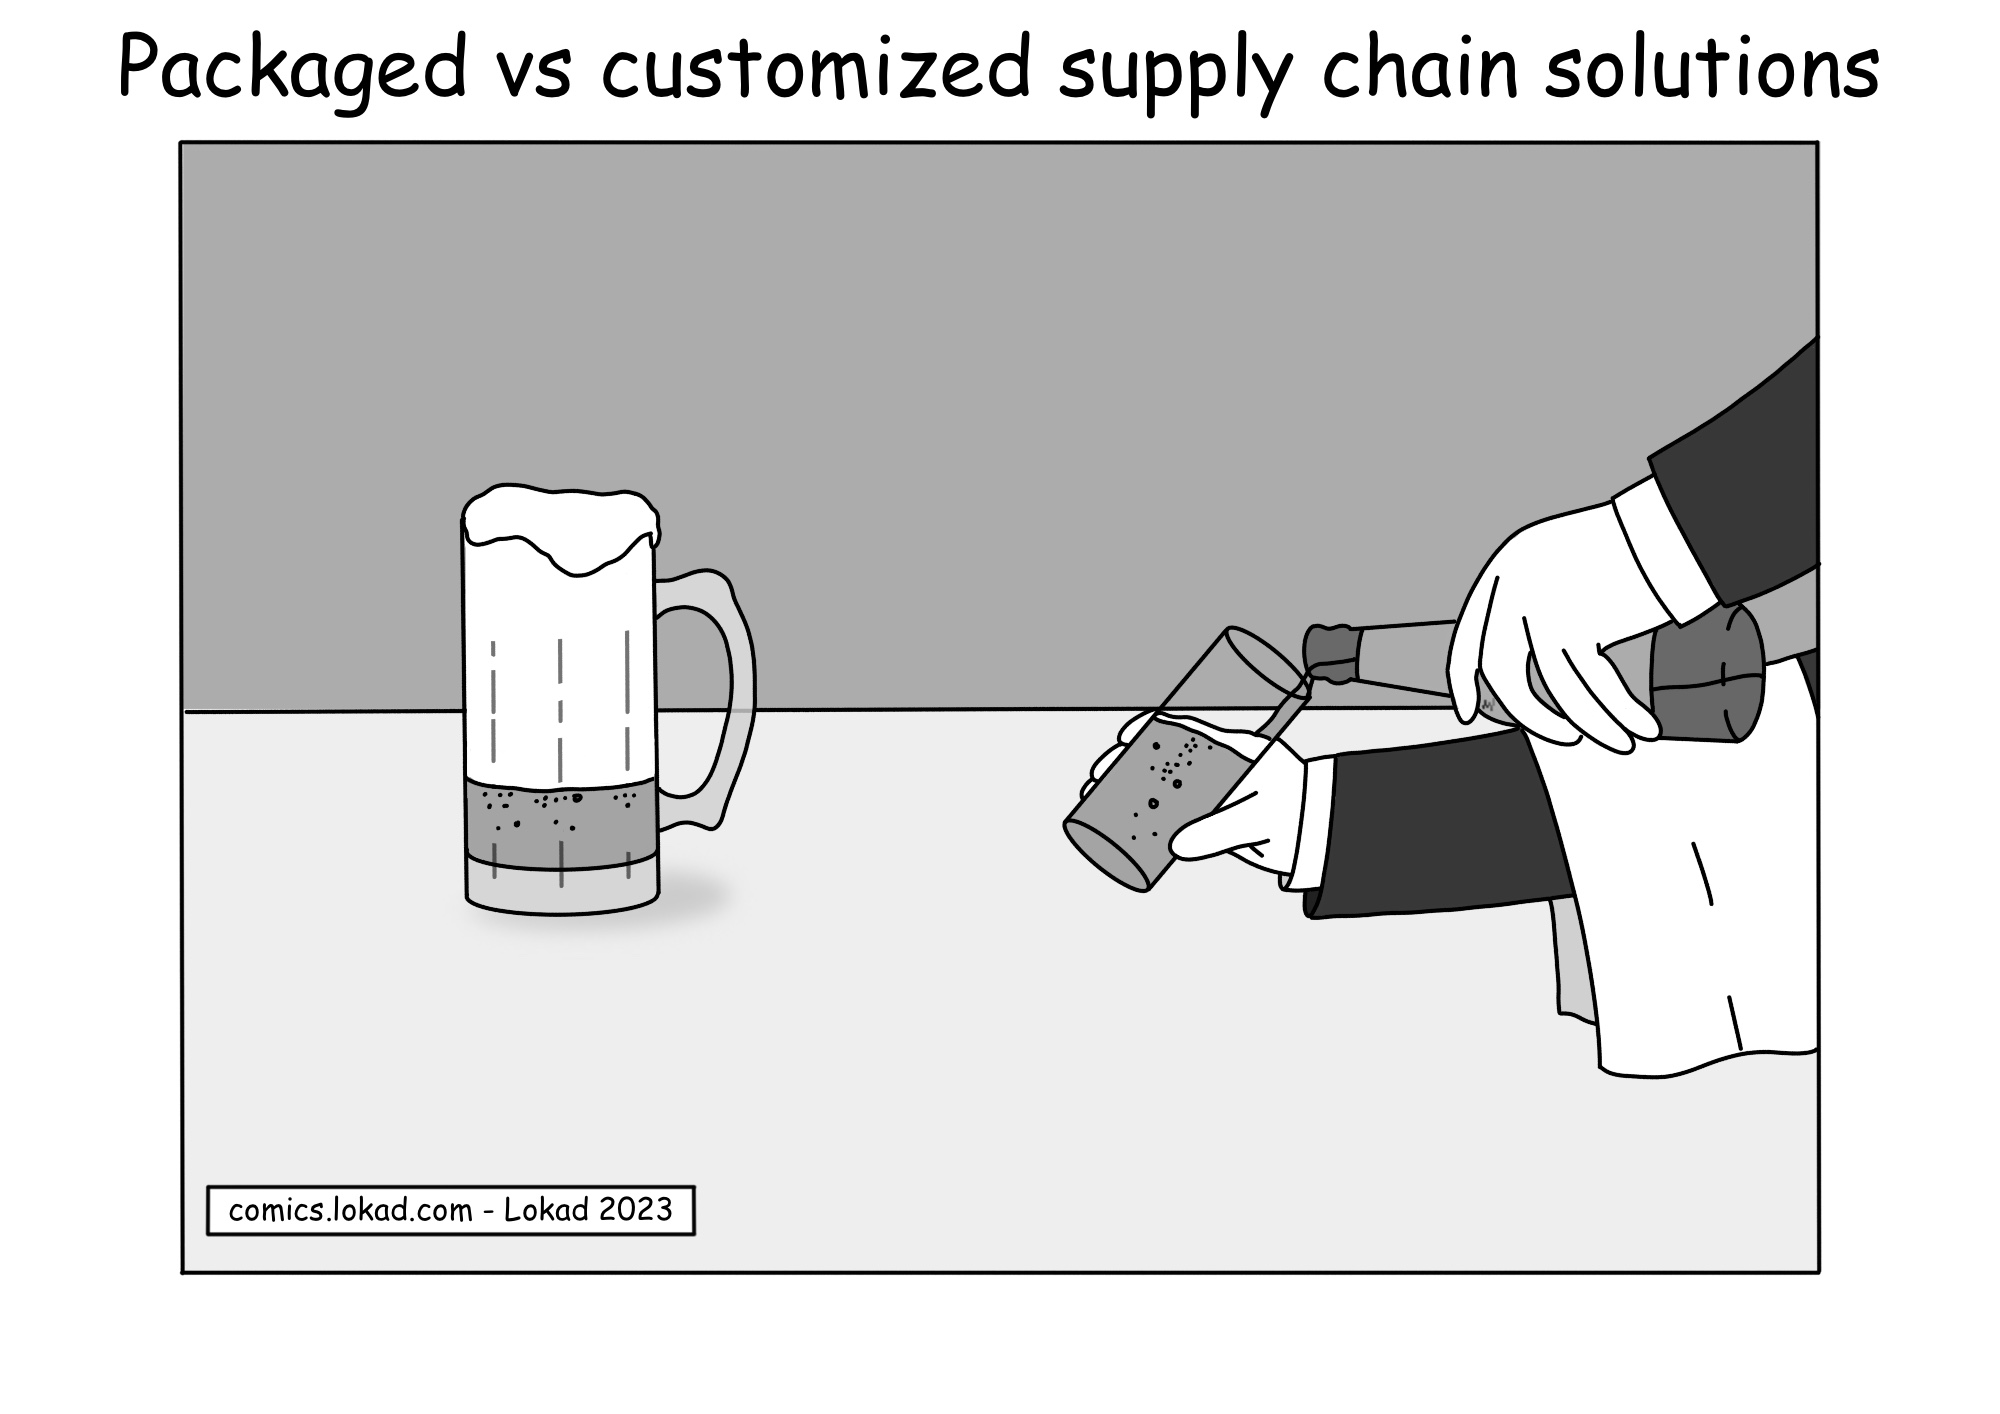 Packaged vs customized supply chain solutions